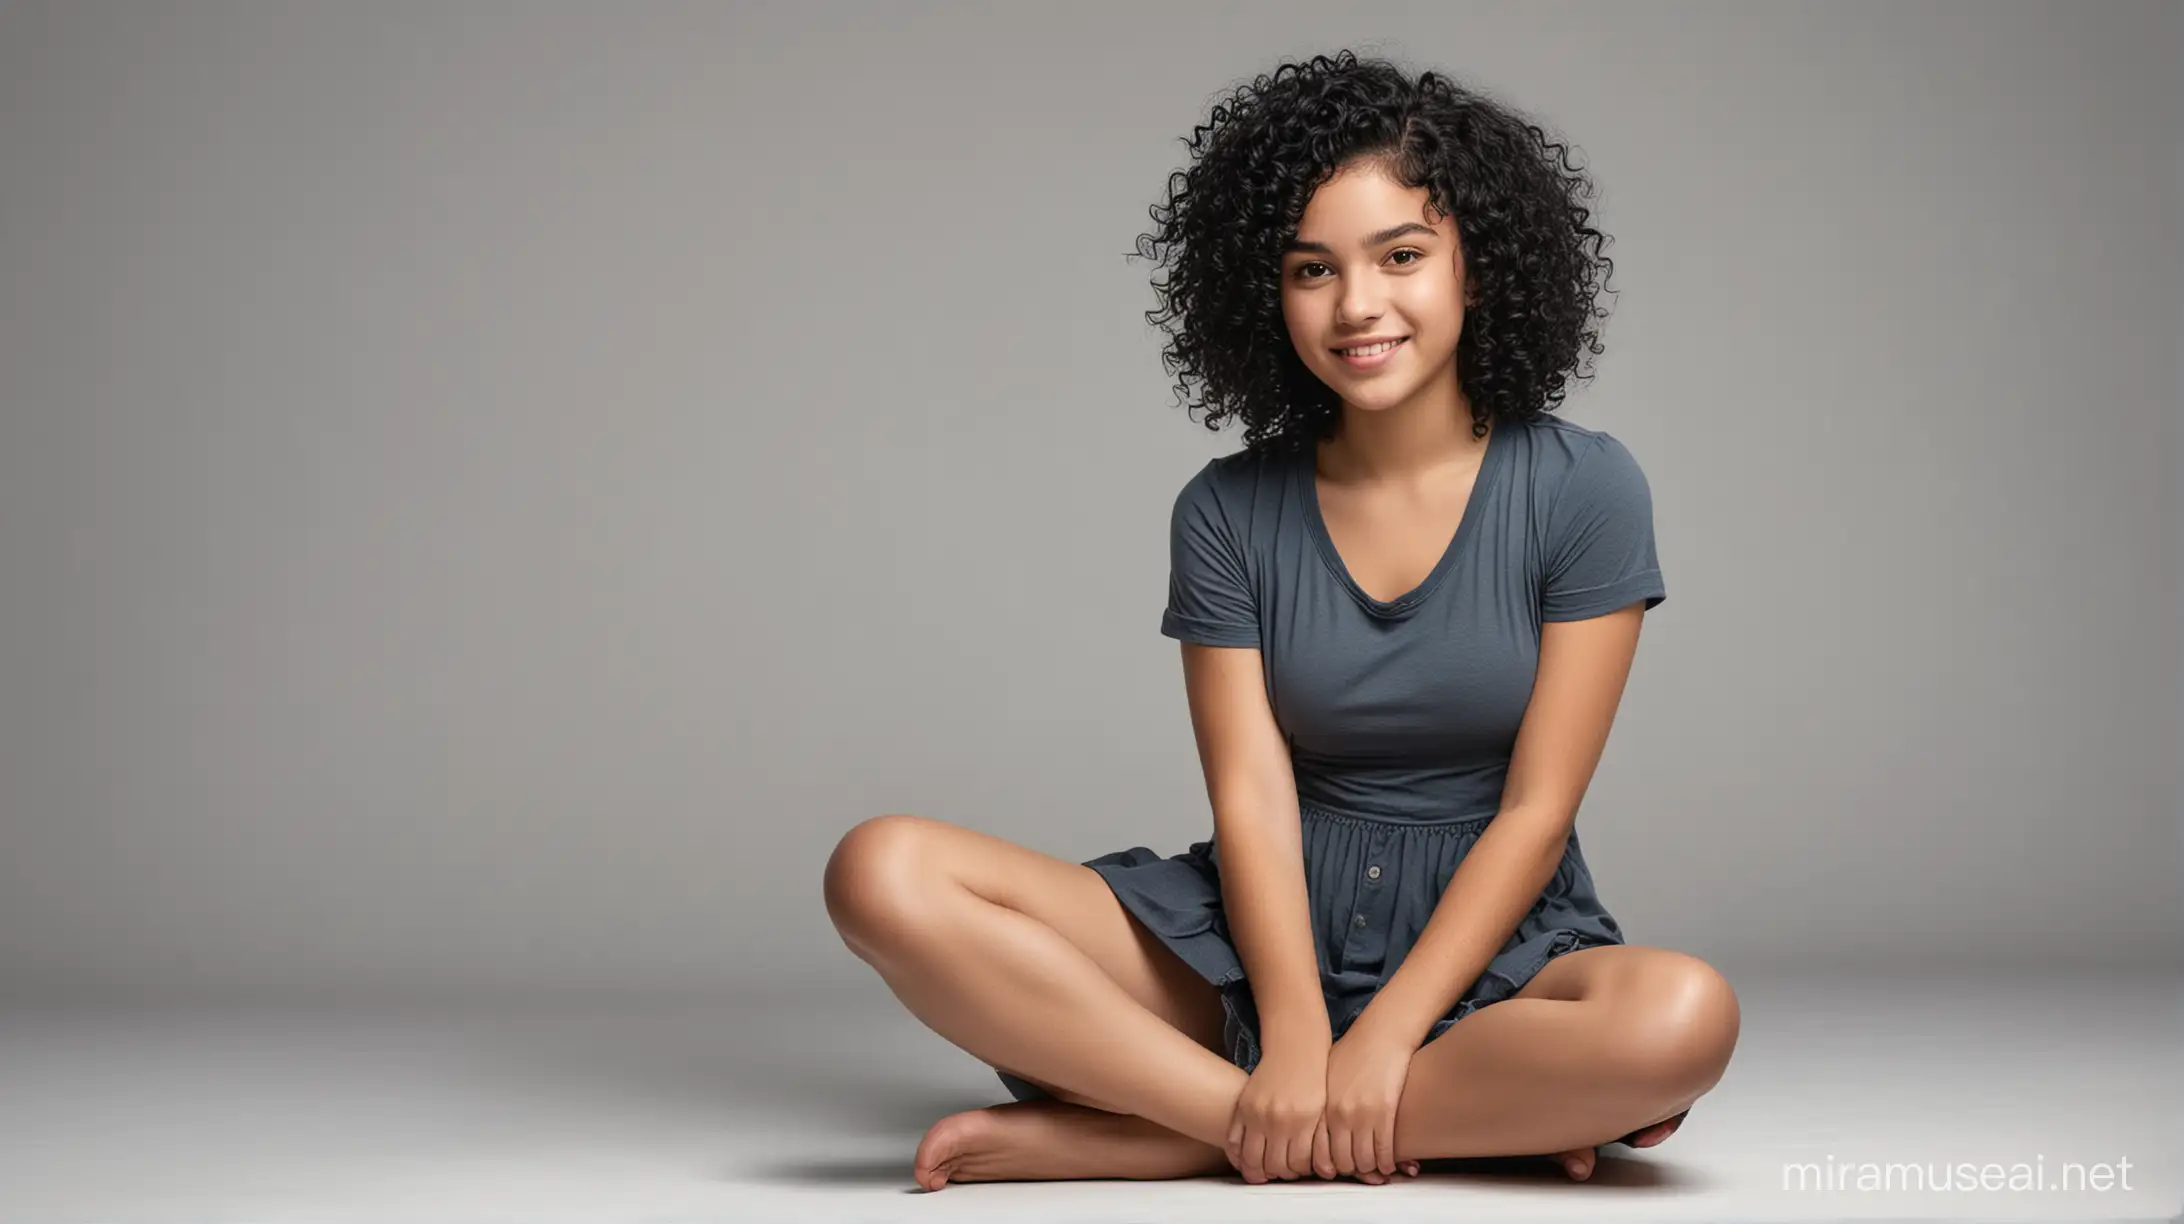 CurlyHaired Girl Sitting Serenely